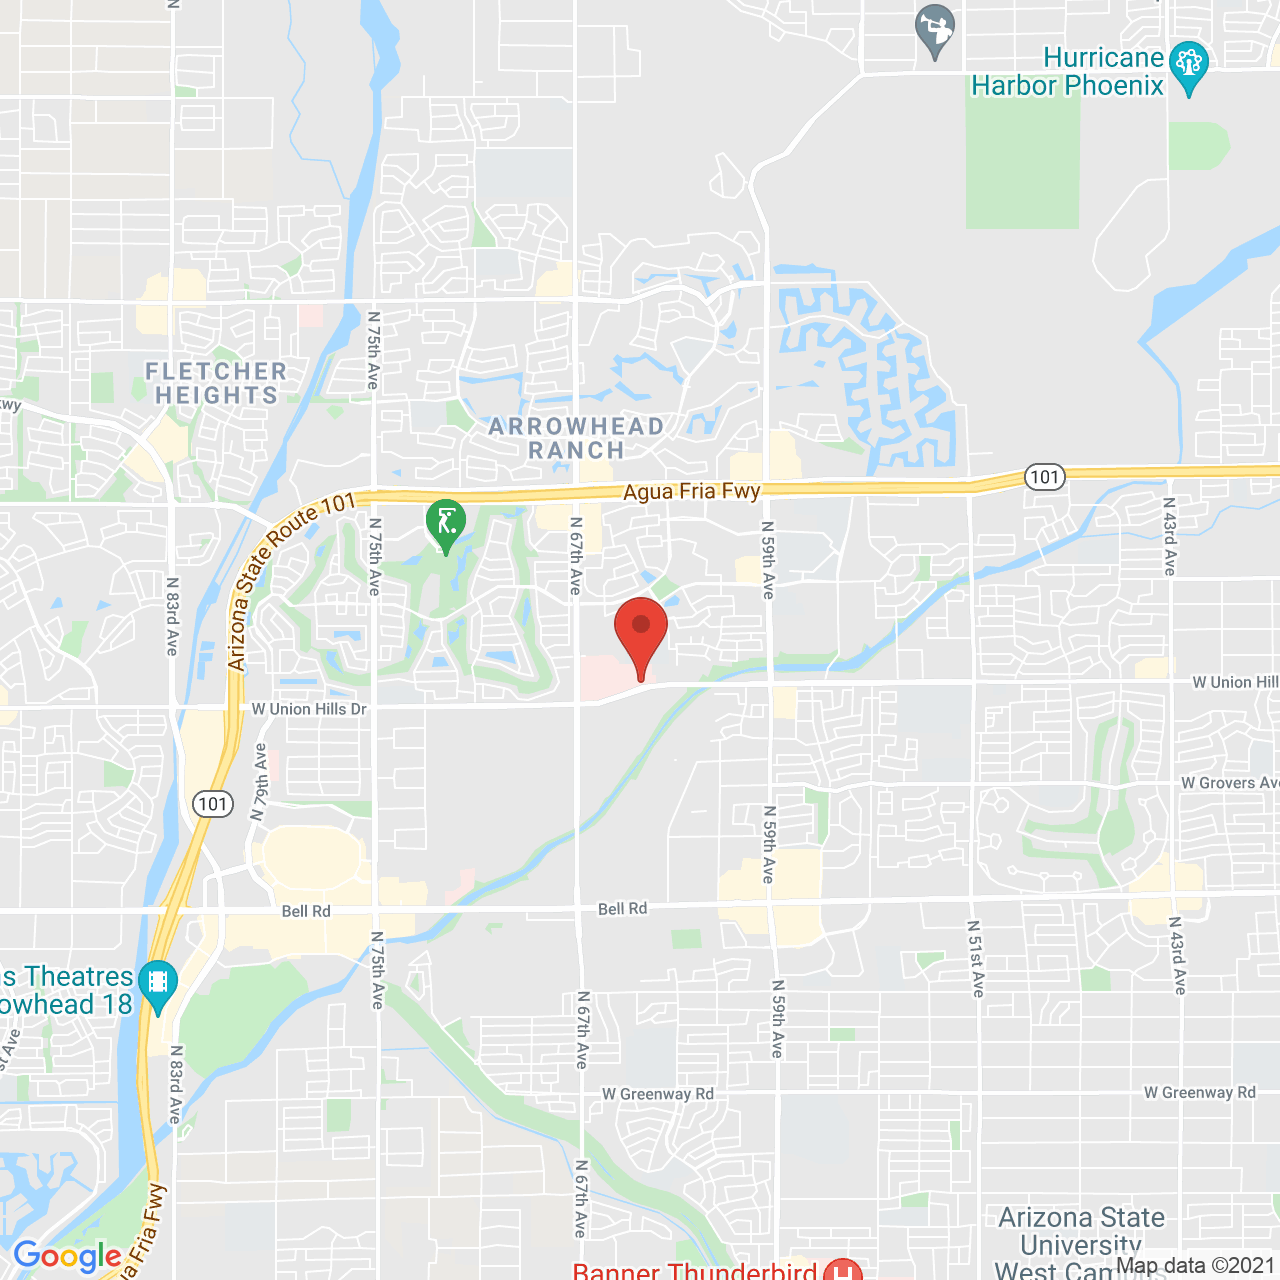 Google map image of our location in 6316 W Union Hills Dr. Glendale, AZ 85308